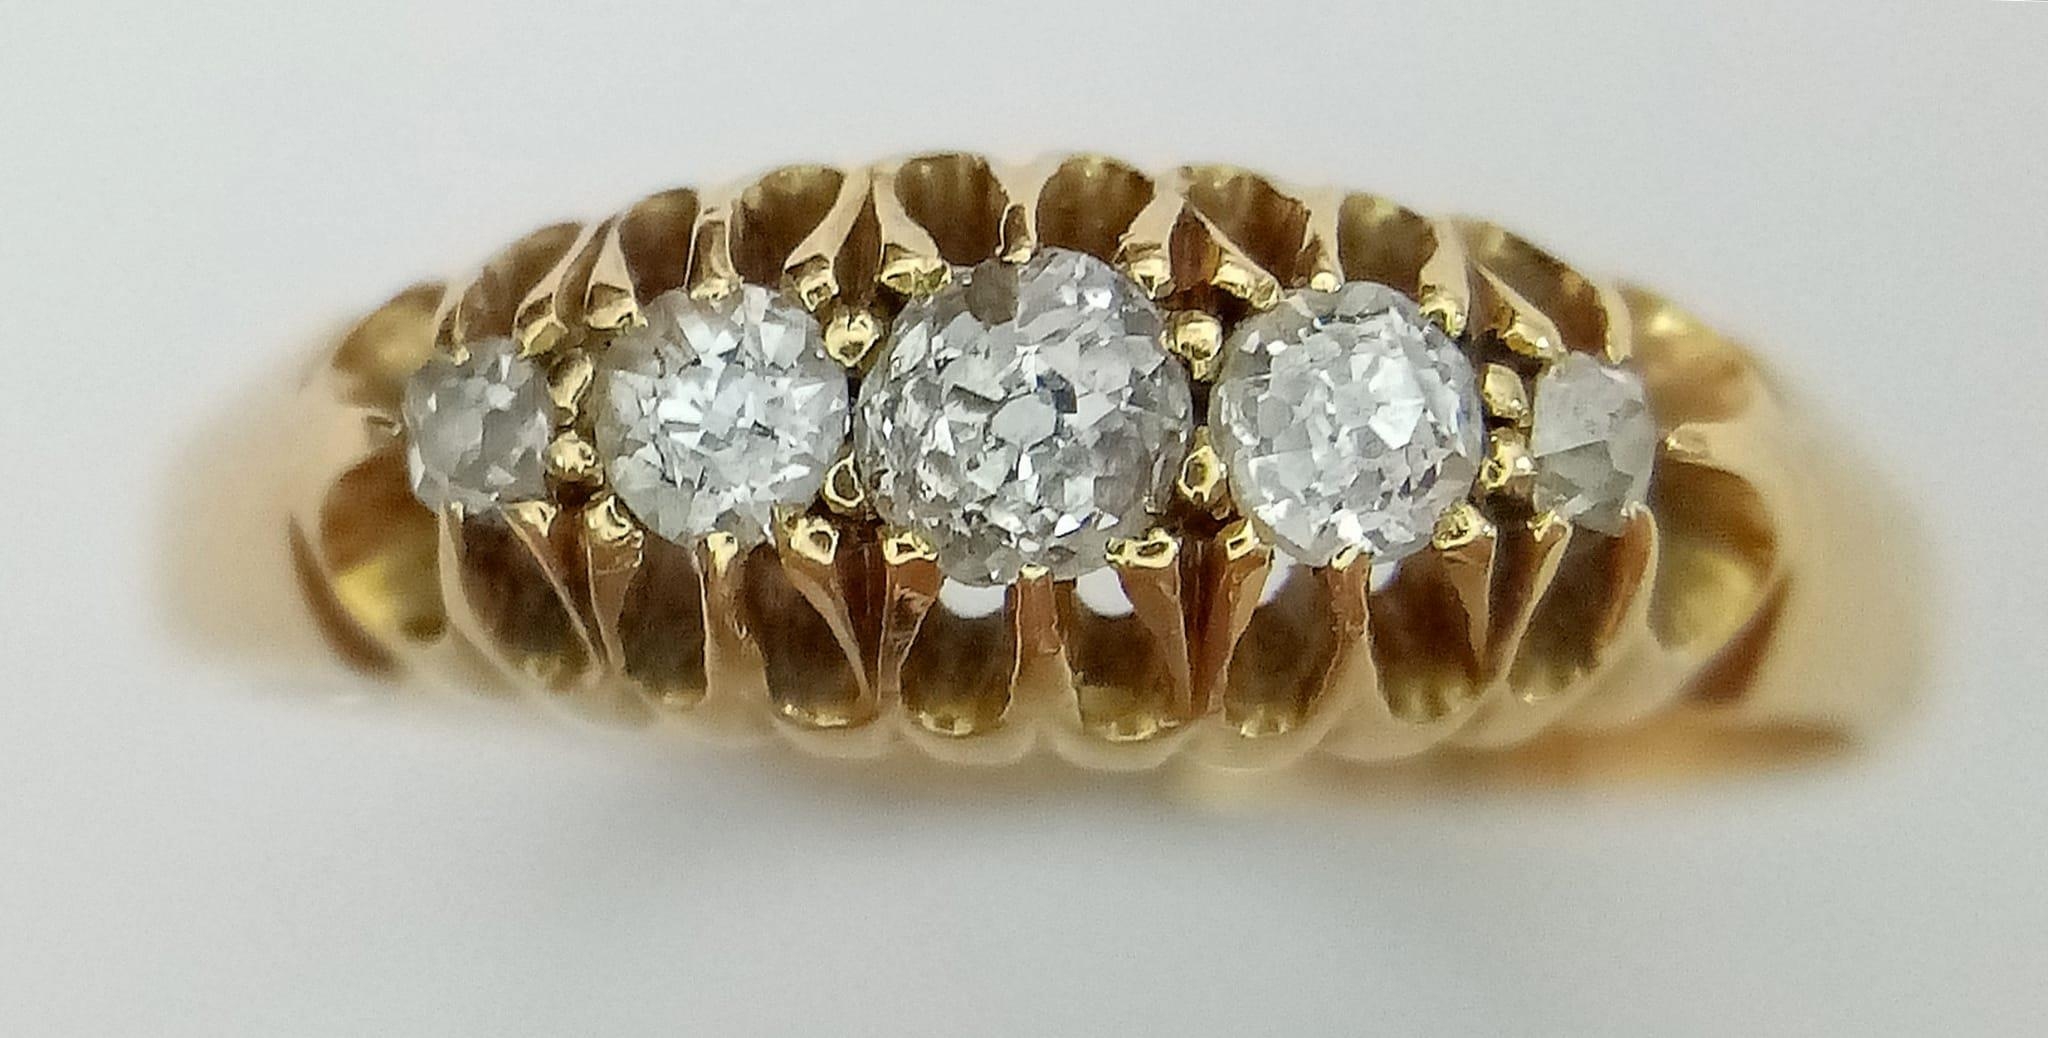 A VINTAGE 18K YELLOW GOLD, 5 STONE OLD CUT DIAMOND RING. Size R, 0.40ctw, 3.3g total weight. - Image 3 of 5